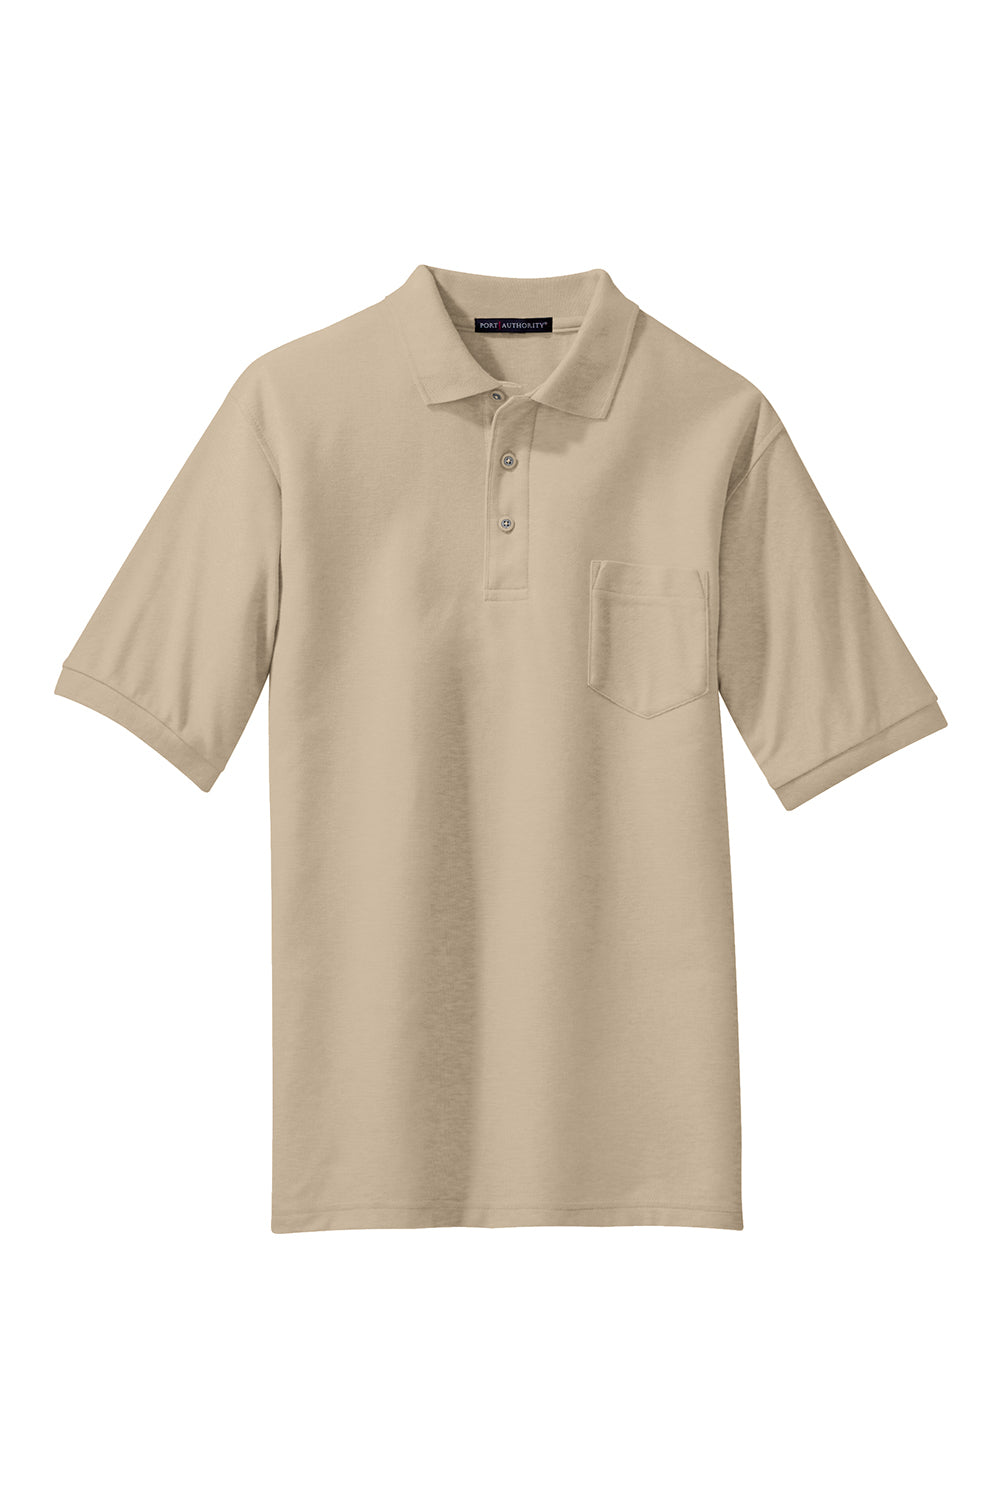 Port Authority K500P Mens Silk Touch Wrinkle Resistant Short Sleeve Polo Shirt w/ Pocket Stone Flat Front